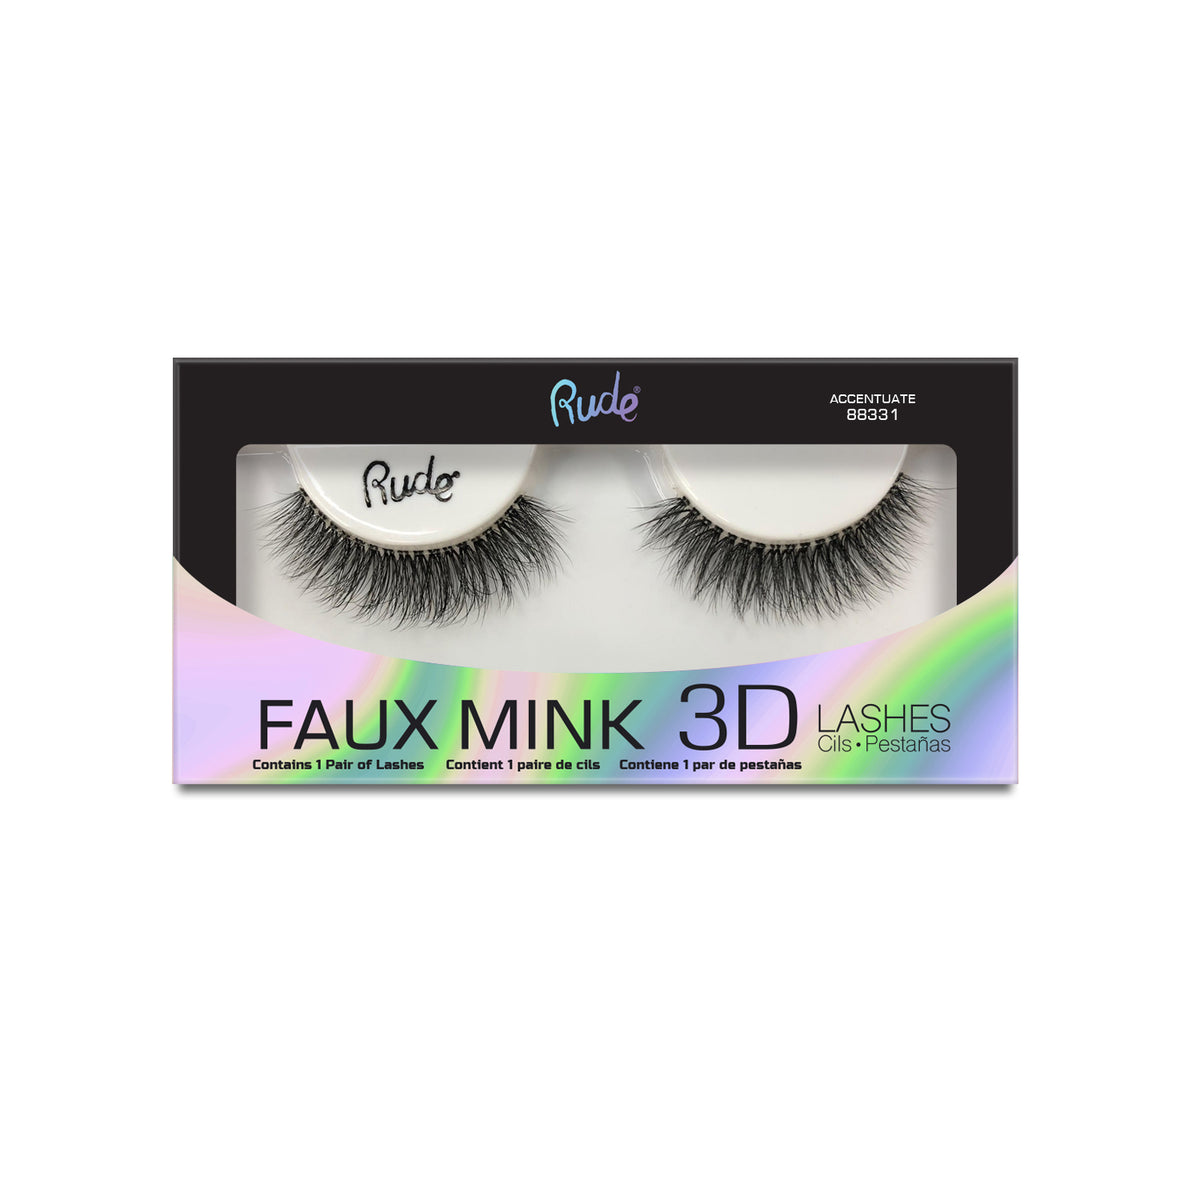 3D Lashes | Full and Fluffy Faux Mink Lashes Accentuate